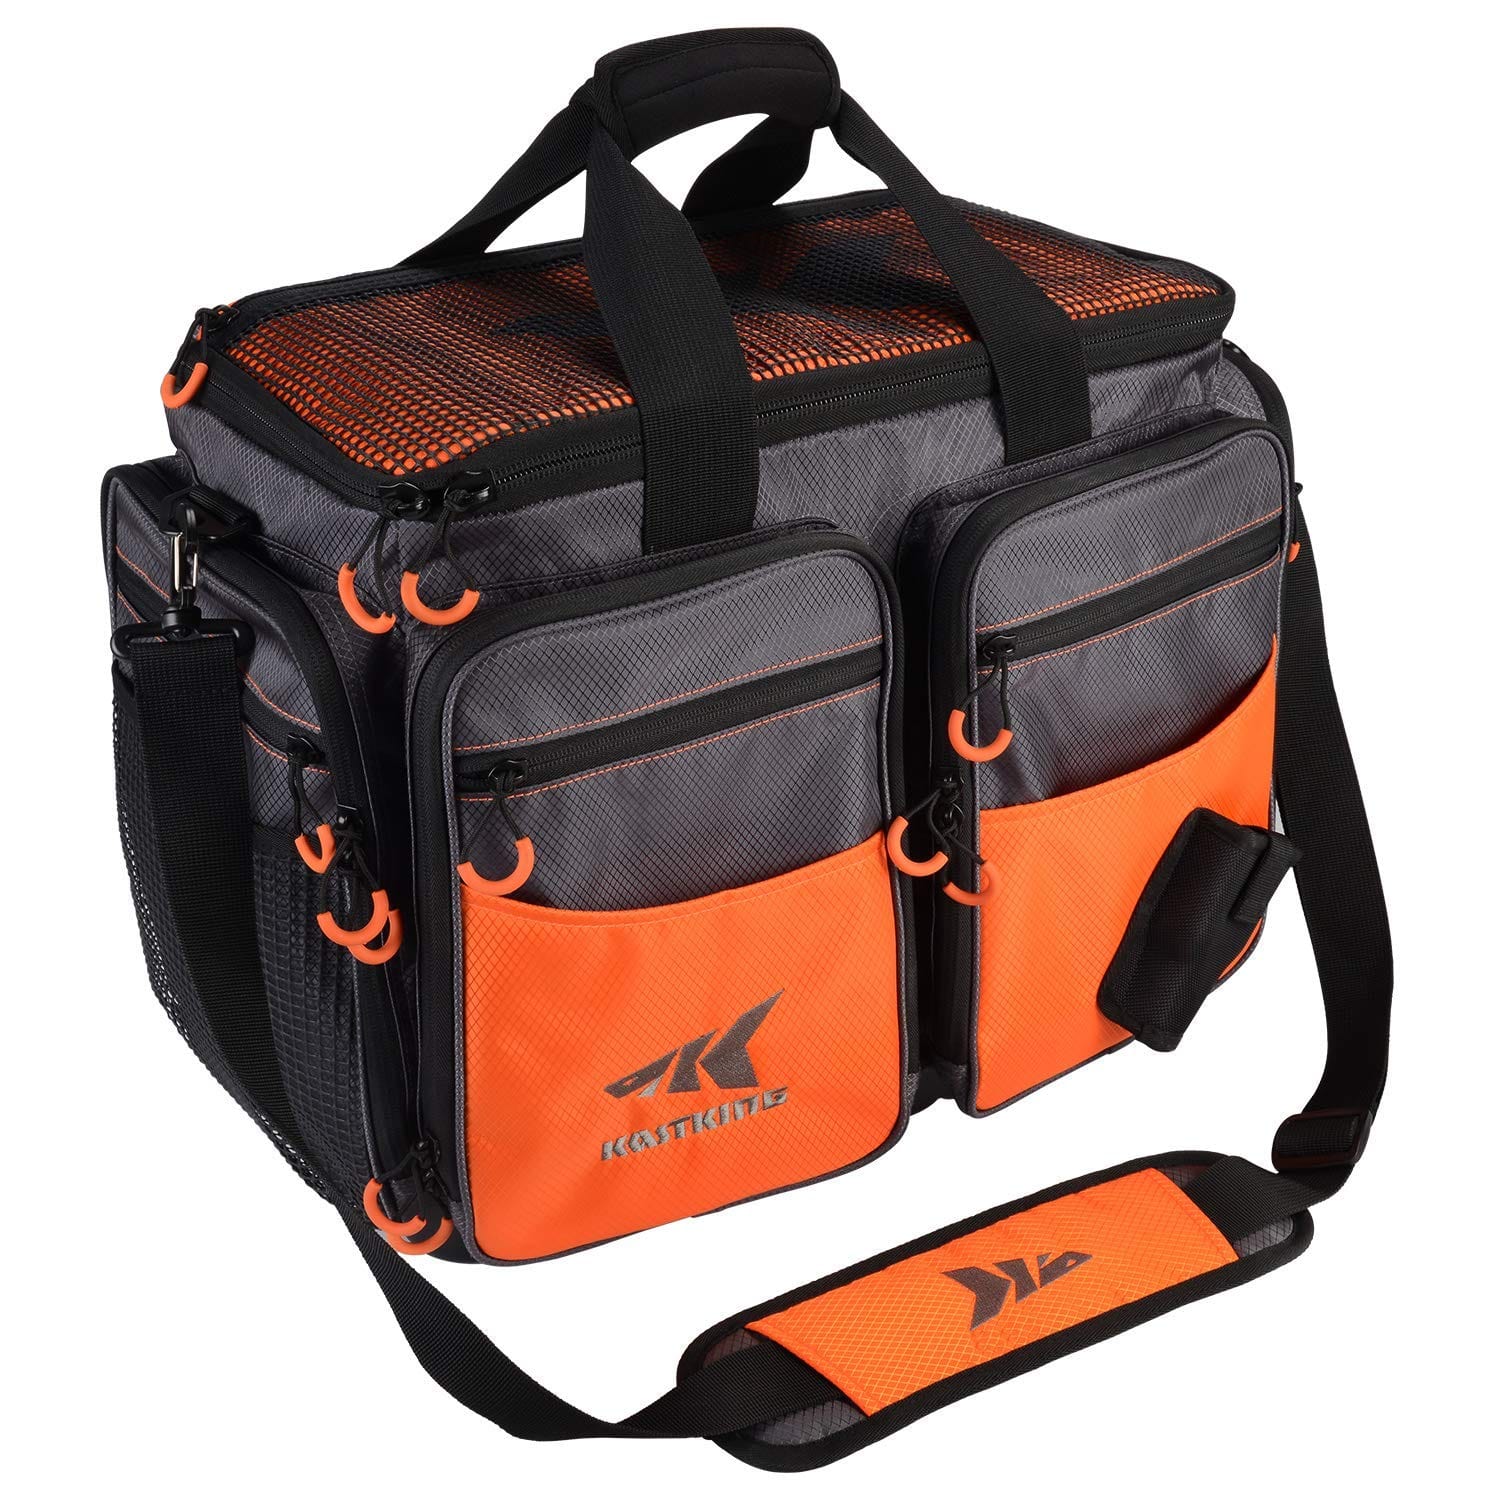 Convenient and spacious fishing gear bag for rods reels and